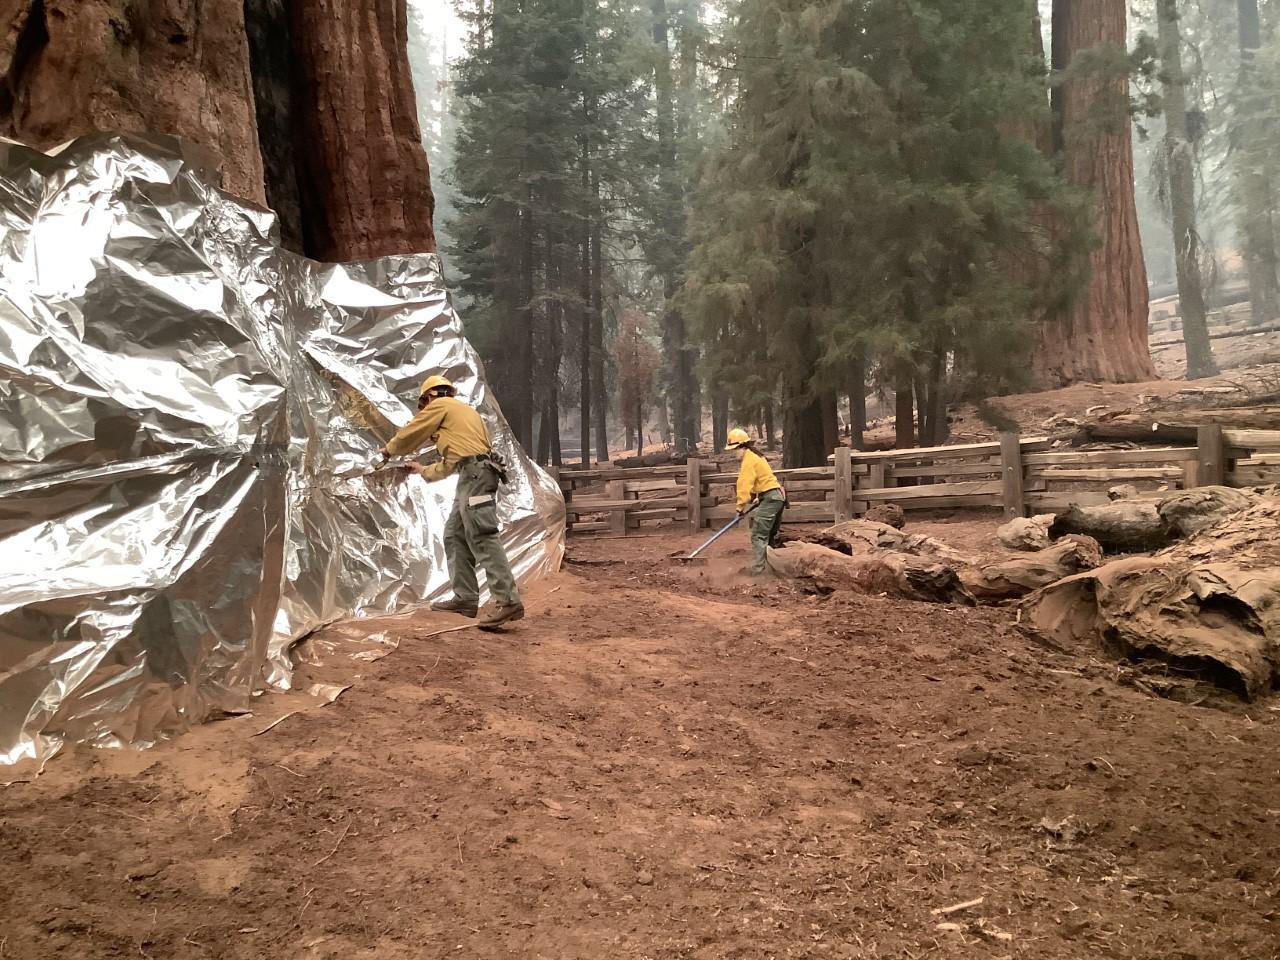 A wildland firefighter secures what looks like a huge roll of aluminum foil around the base of a huge red tree while another firefighter rakes nearby. 